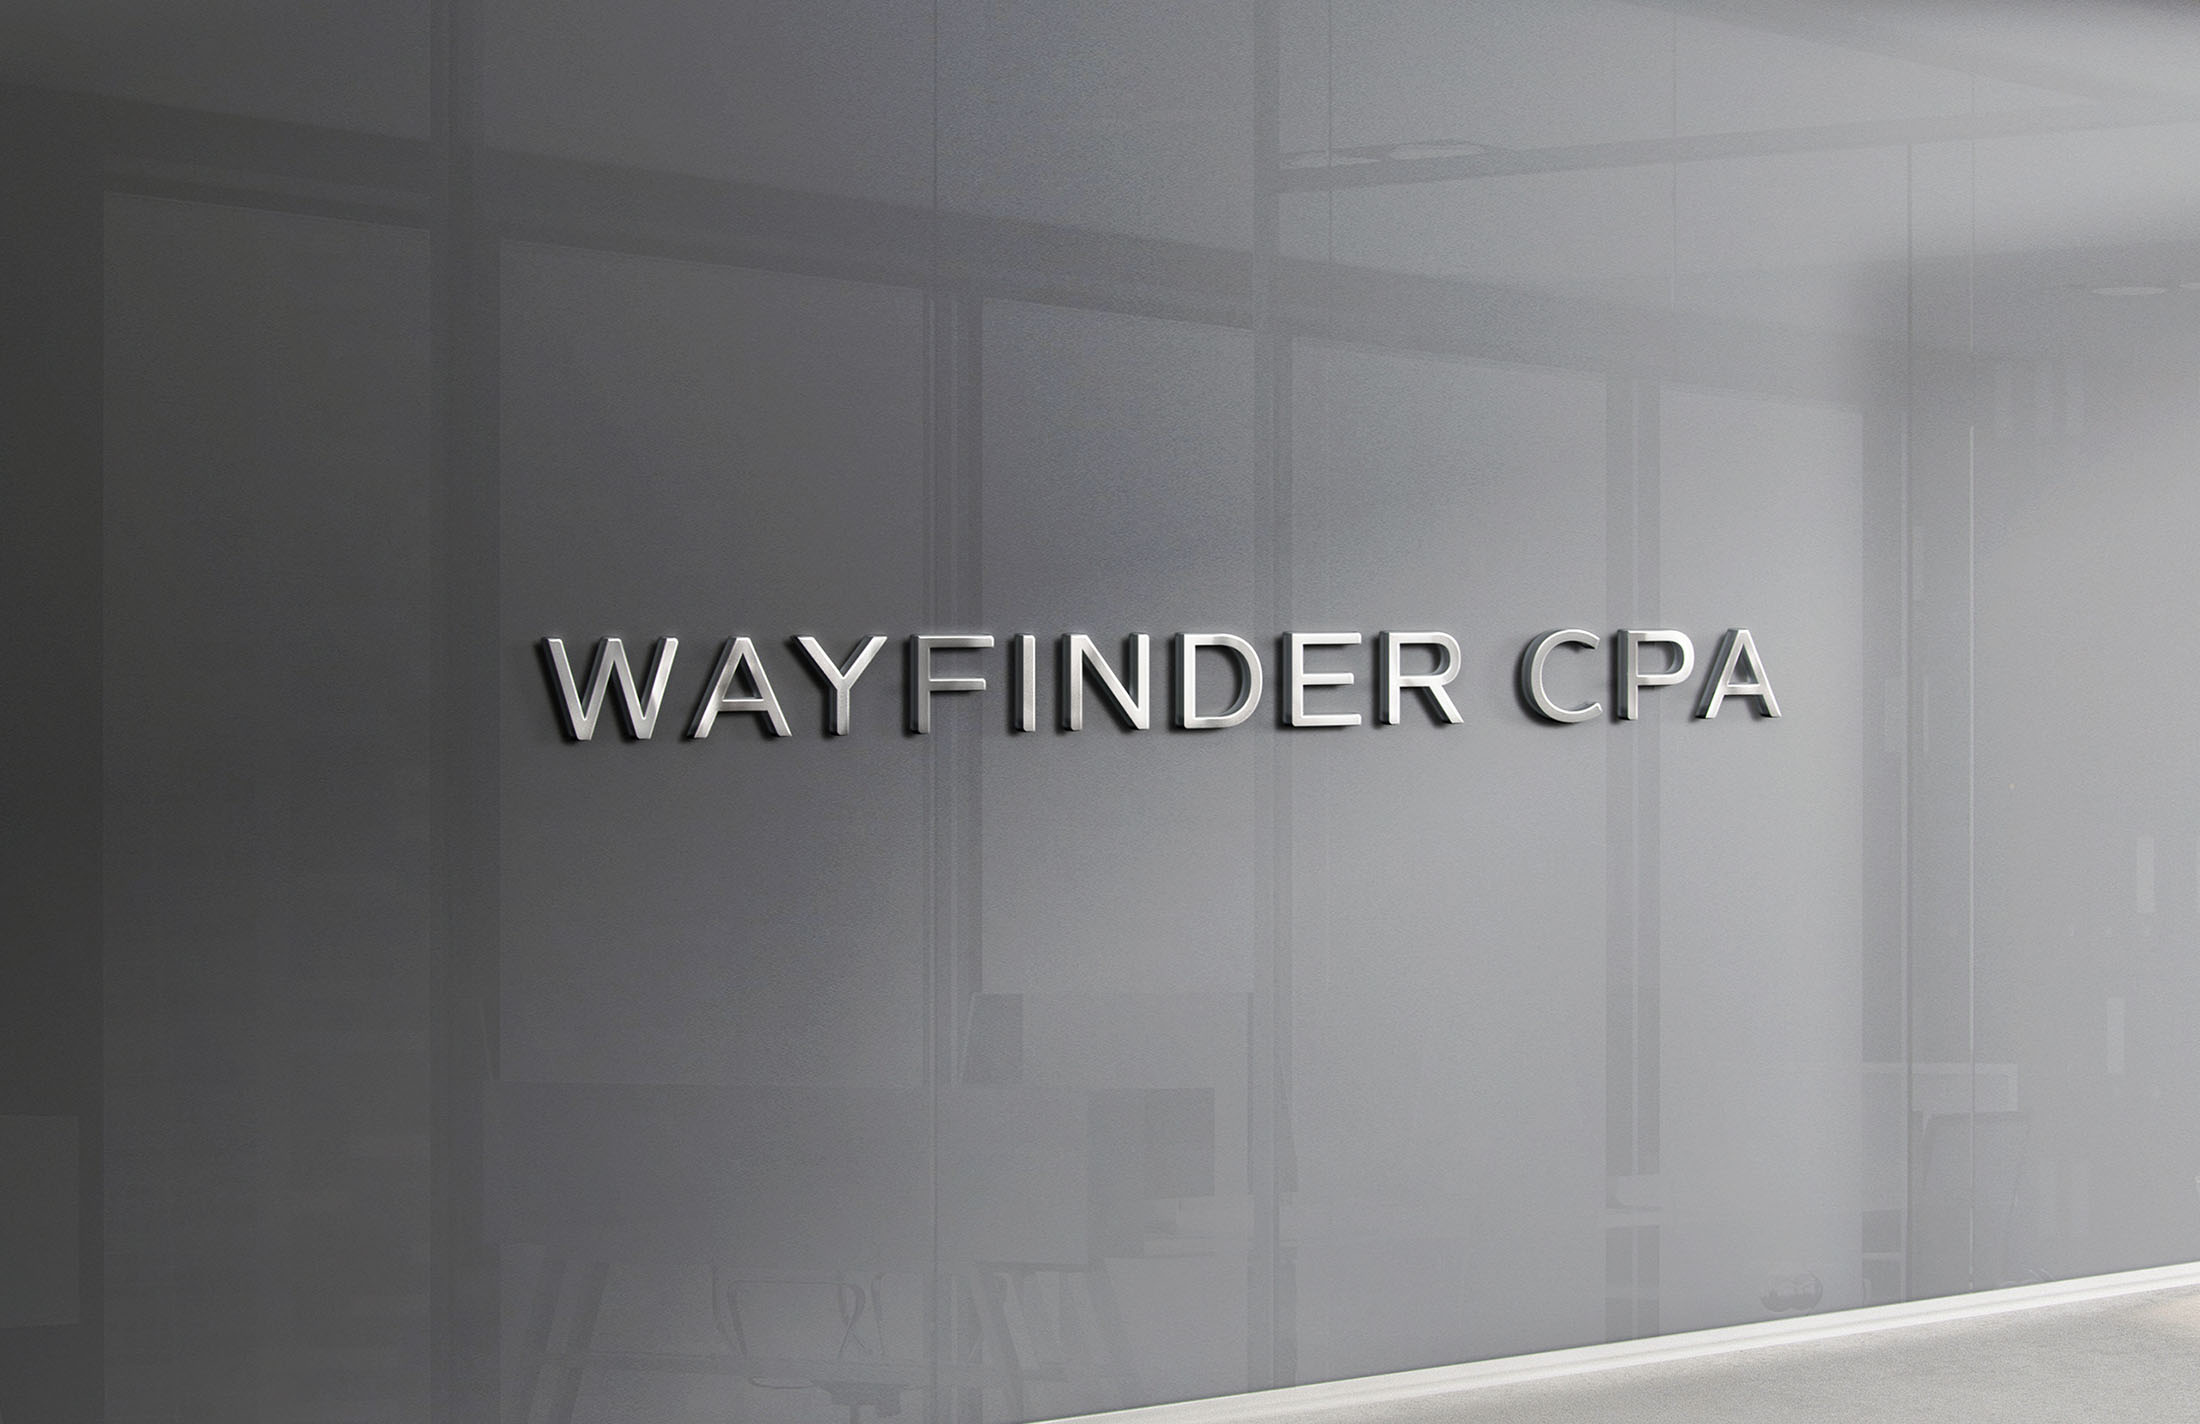 Brand business signage with logo - Wayfinder CPA - Whiskey and Red Small Business Branding and Website Design Packages